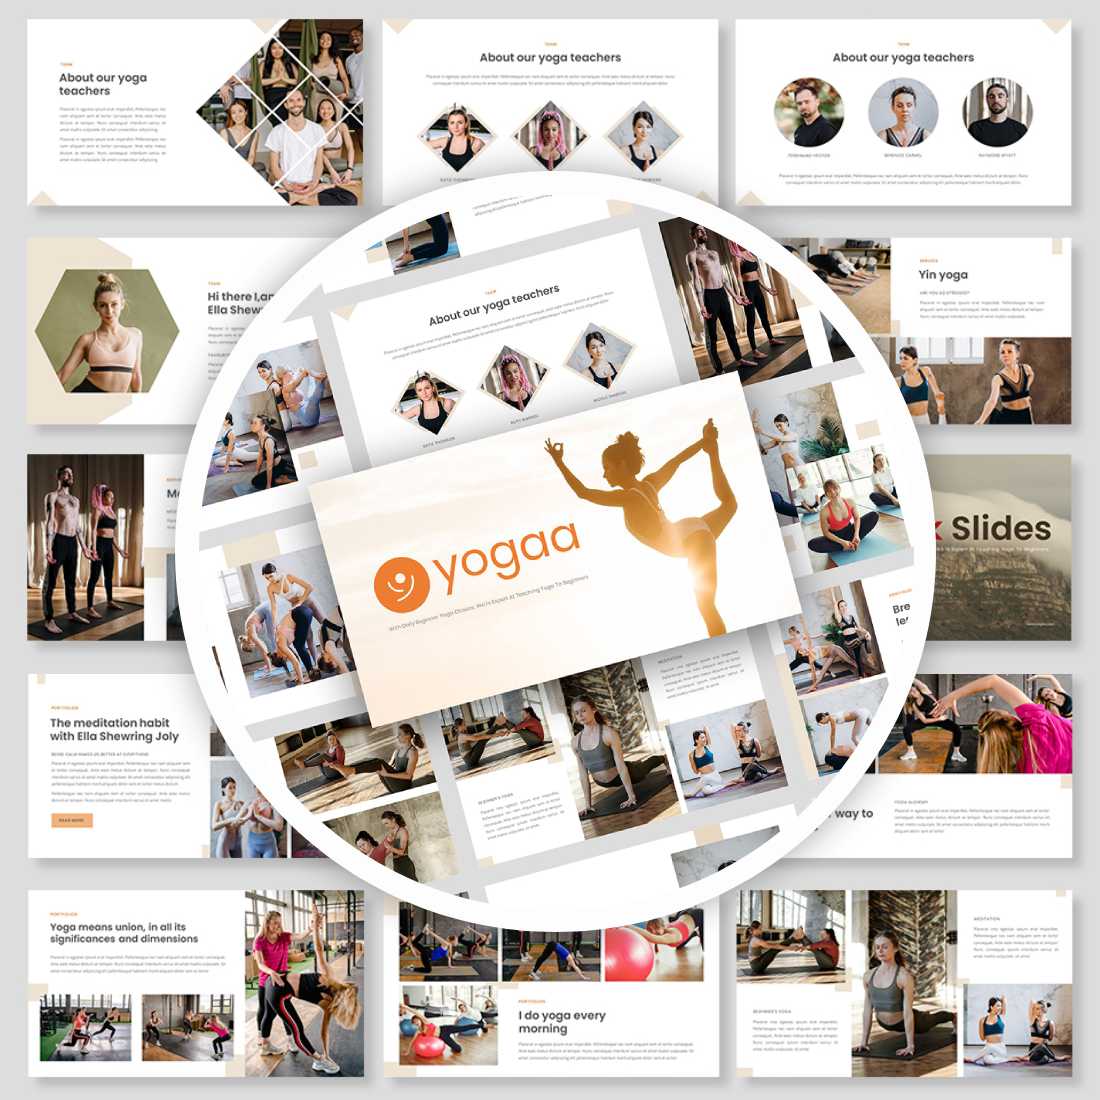 Yogaa - Yoga Presentation PowerPoint Template cover image.